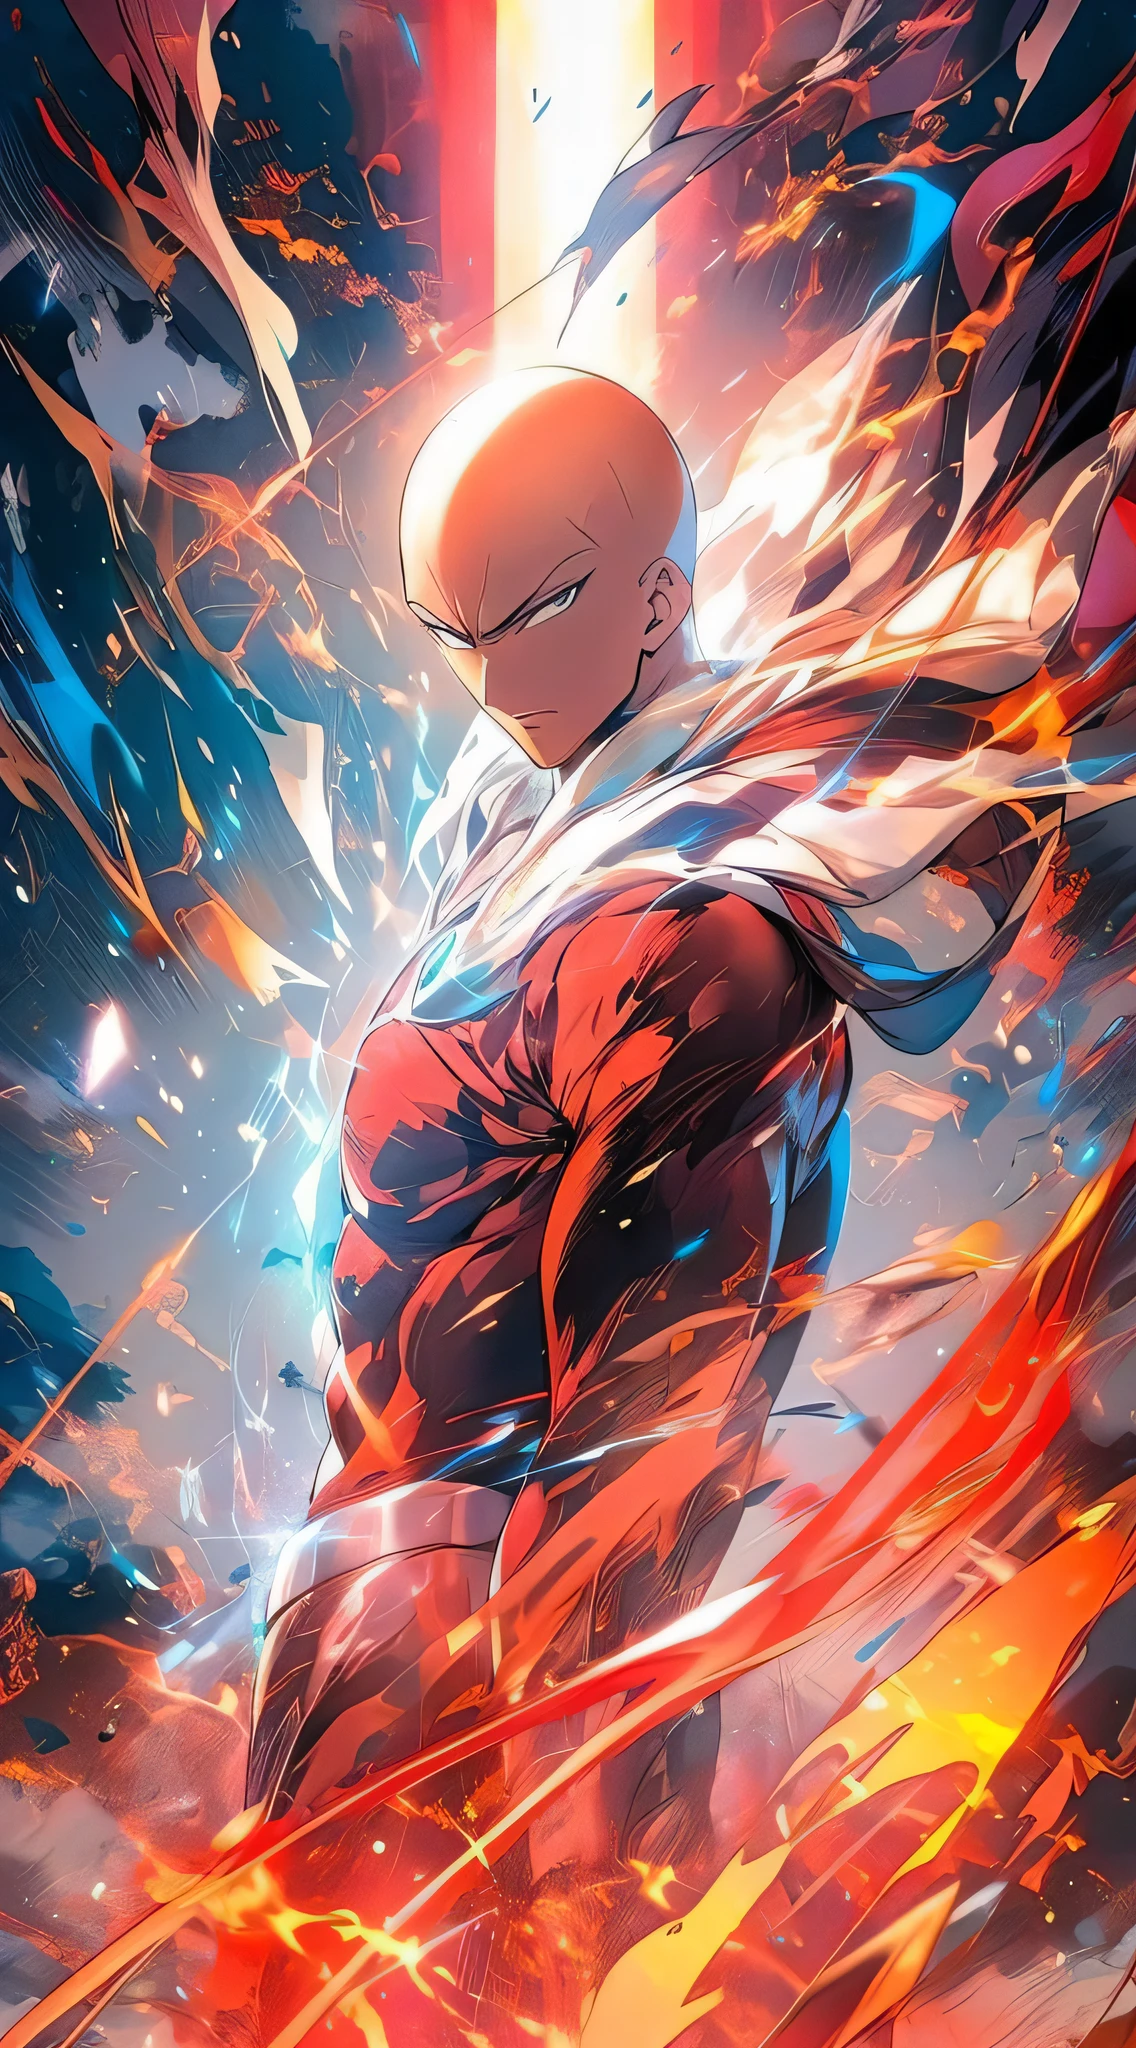 A man in a red suit, standing in front of the fire, One Punch Man, Манга One Punch Man, Saitama, Шеф-повар Saitama One Punch Man, Key Anime Visuals, such as Saitama, Handsome Saitama, Handsome Saitama. Intricate, Portrait of Saitama, profile picture 1024px, an epic anime of a energy man, official arts